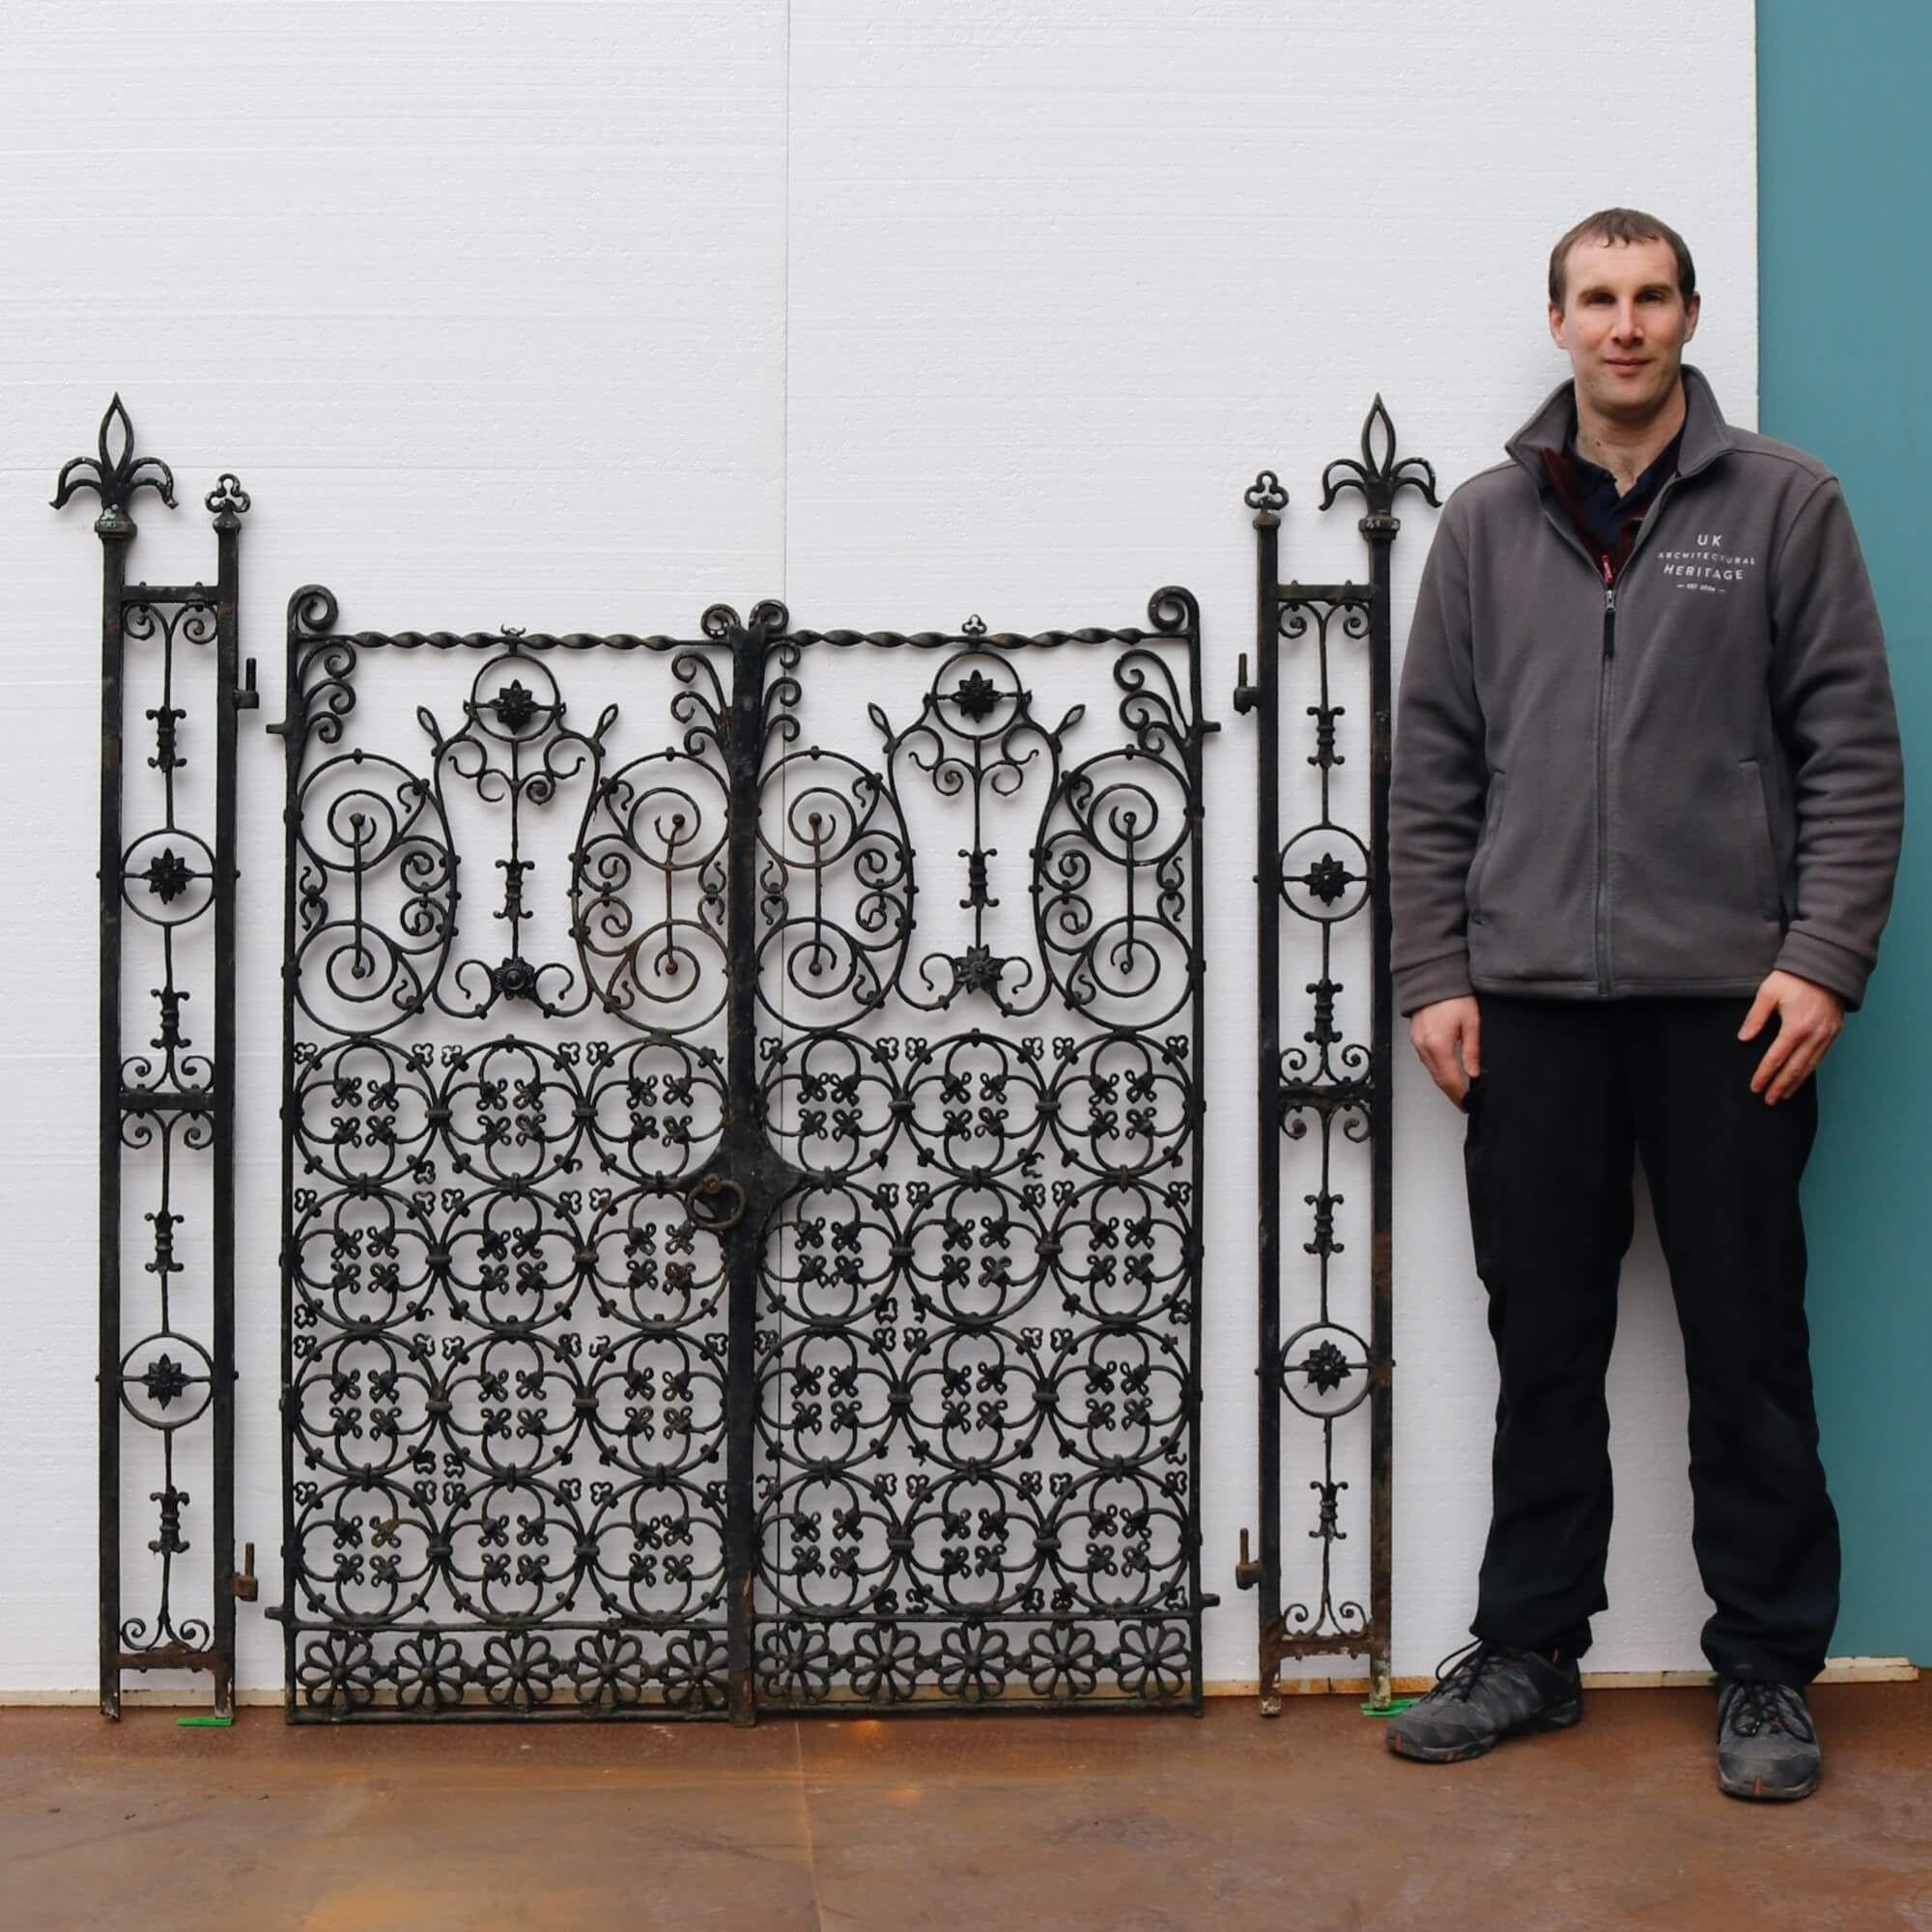 A highly ornate set of late Georgian wrought iron garden gates with accompanying posts handcrafted at the hand of a talented 19th century blacksmith. These beautiful English gates are in original condition and while there are a few historic repairs